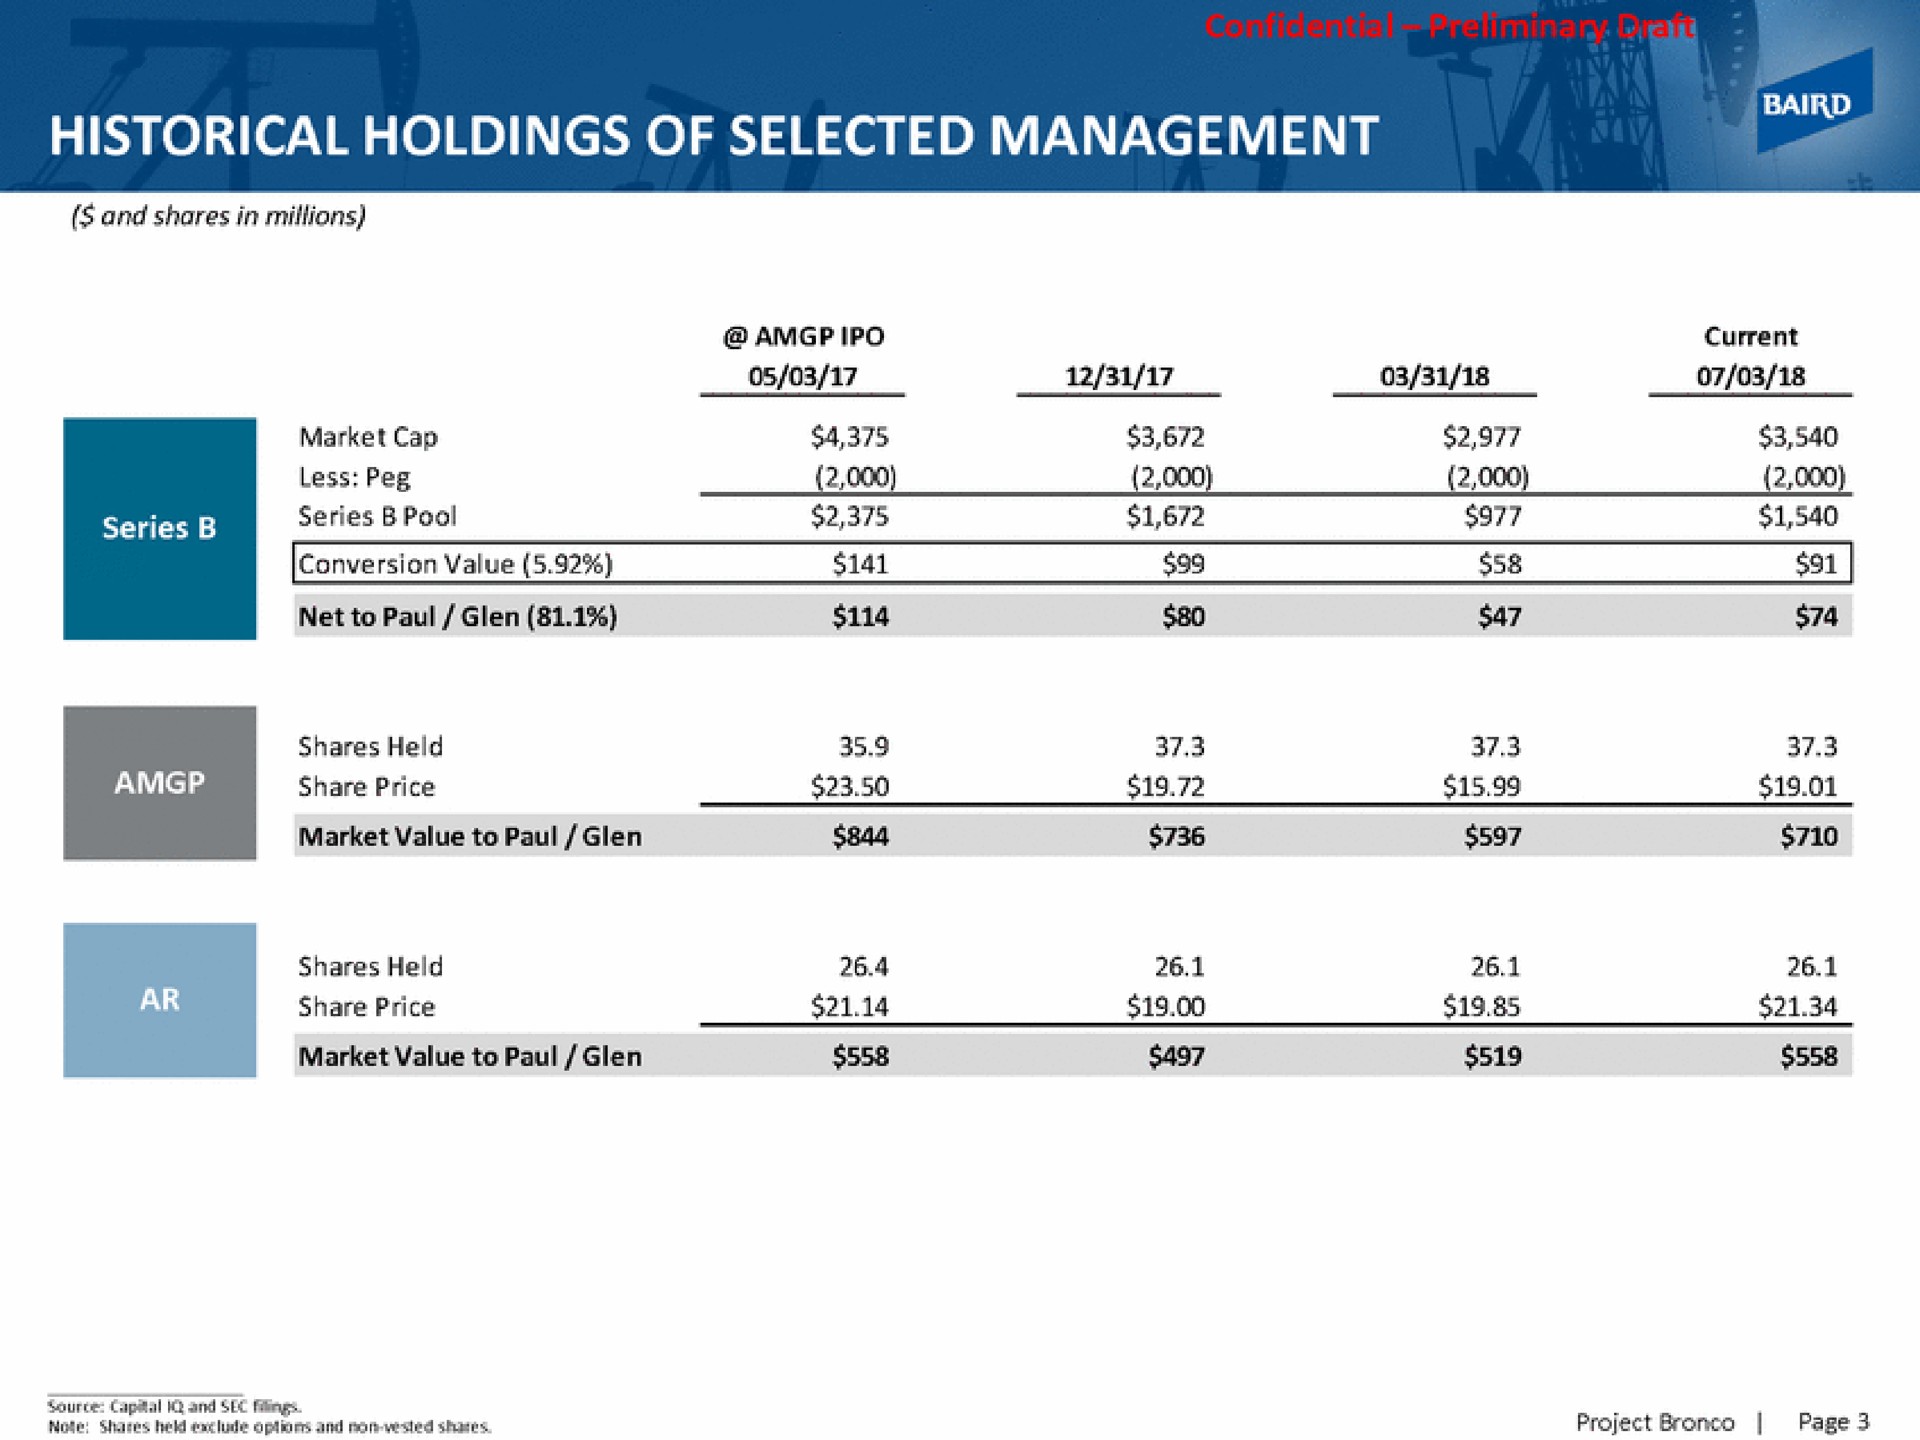 historical holdings of selected management | Baird